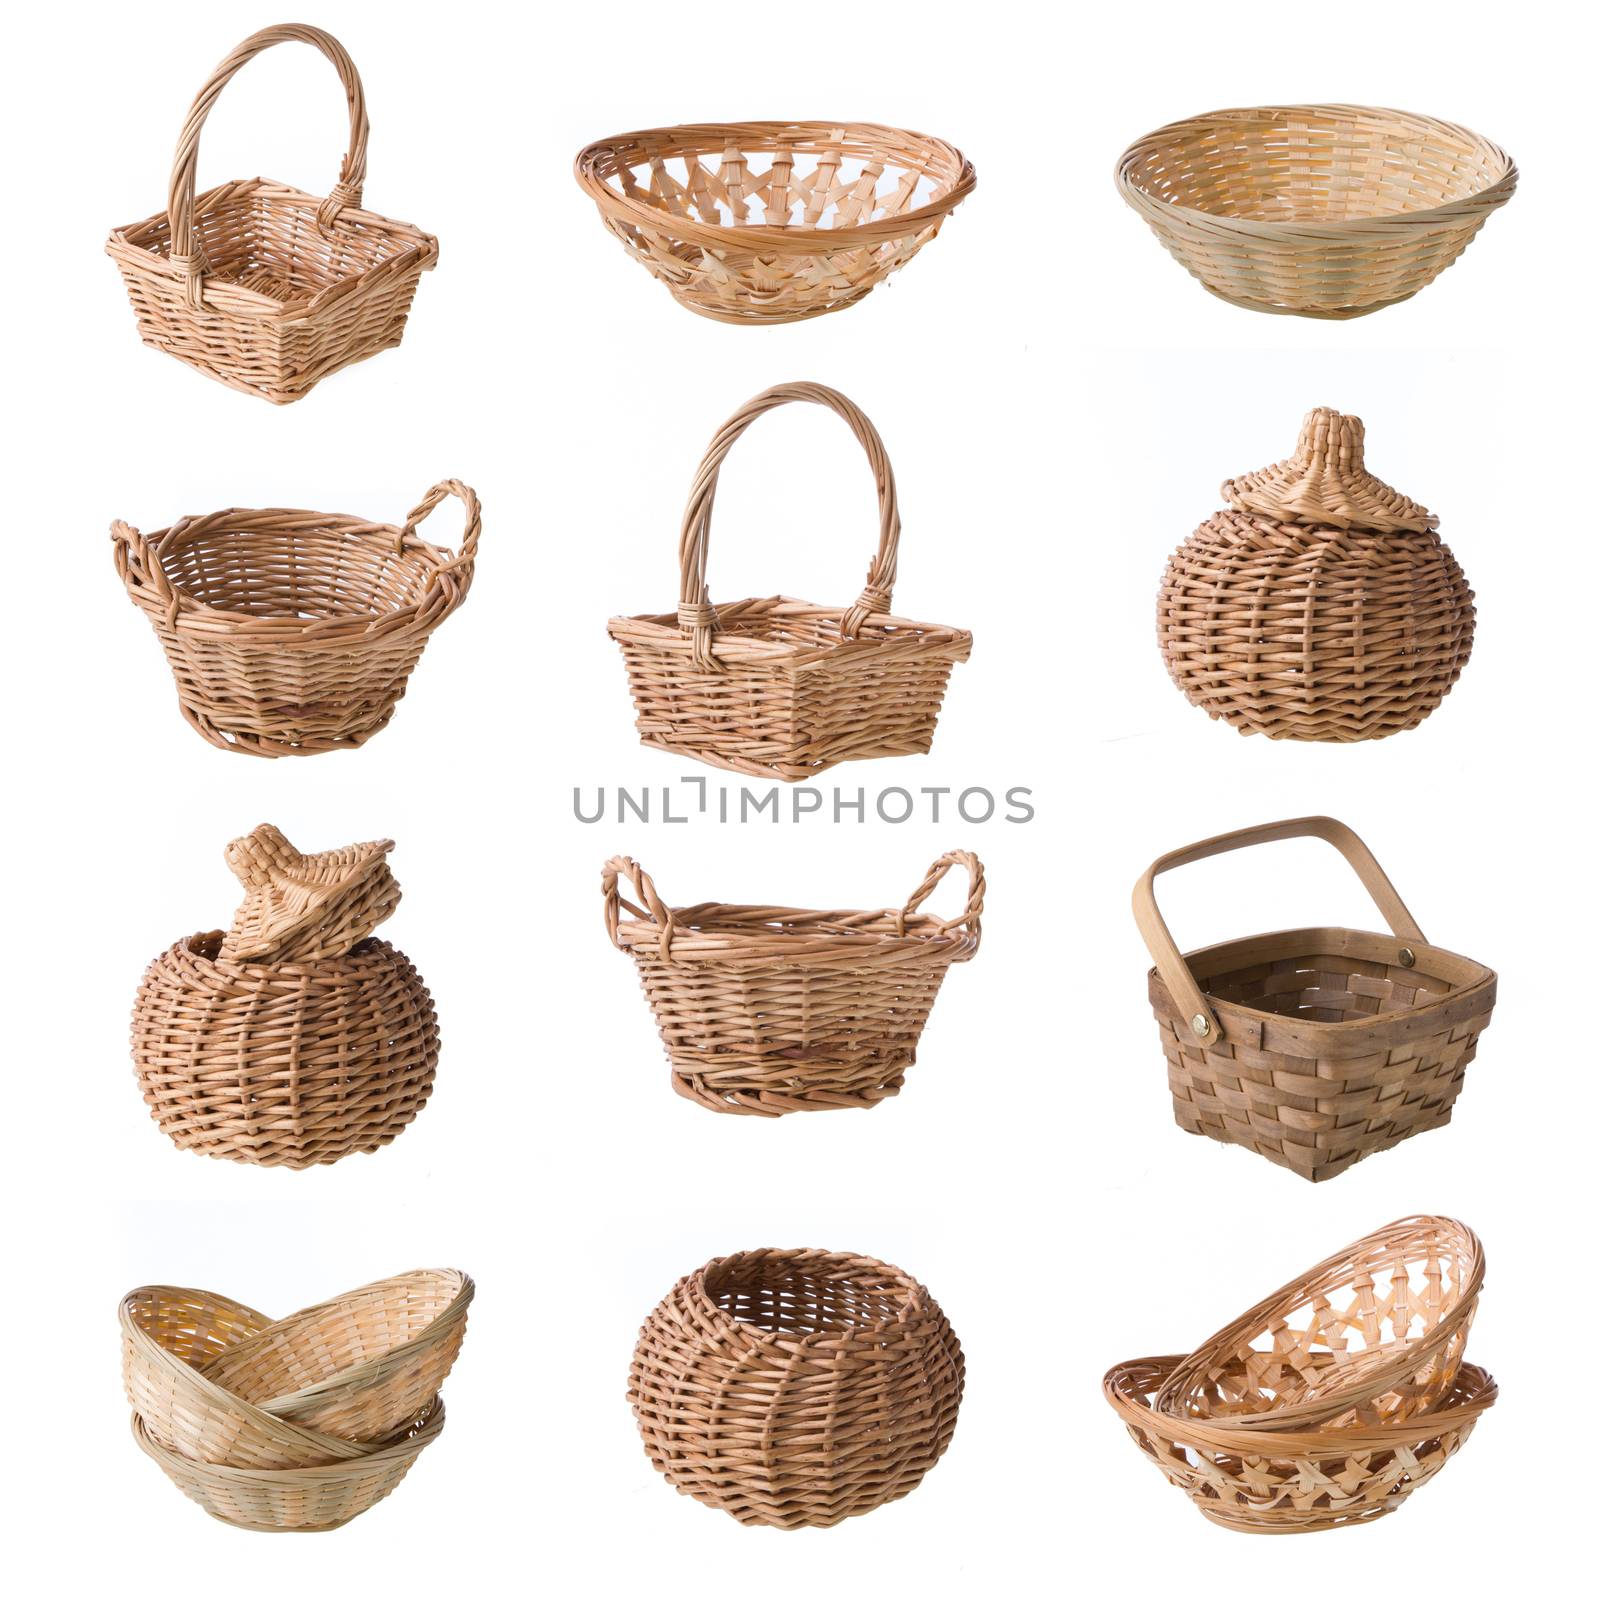 Wicker Basket by tehcheesiong